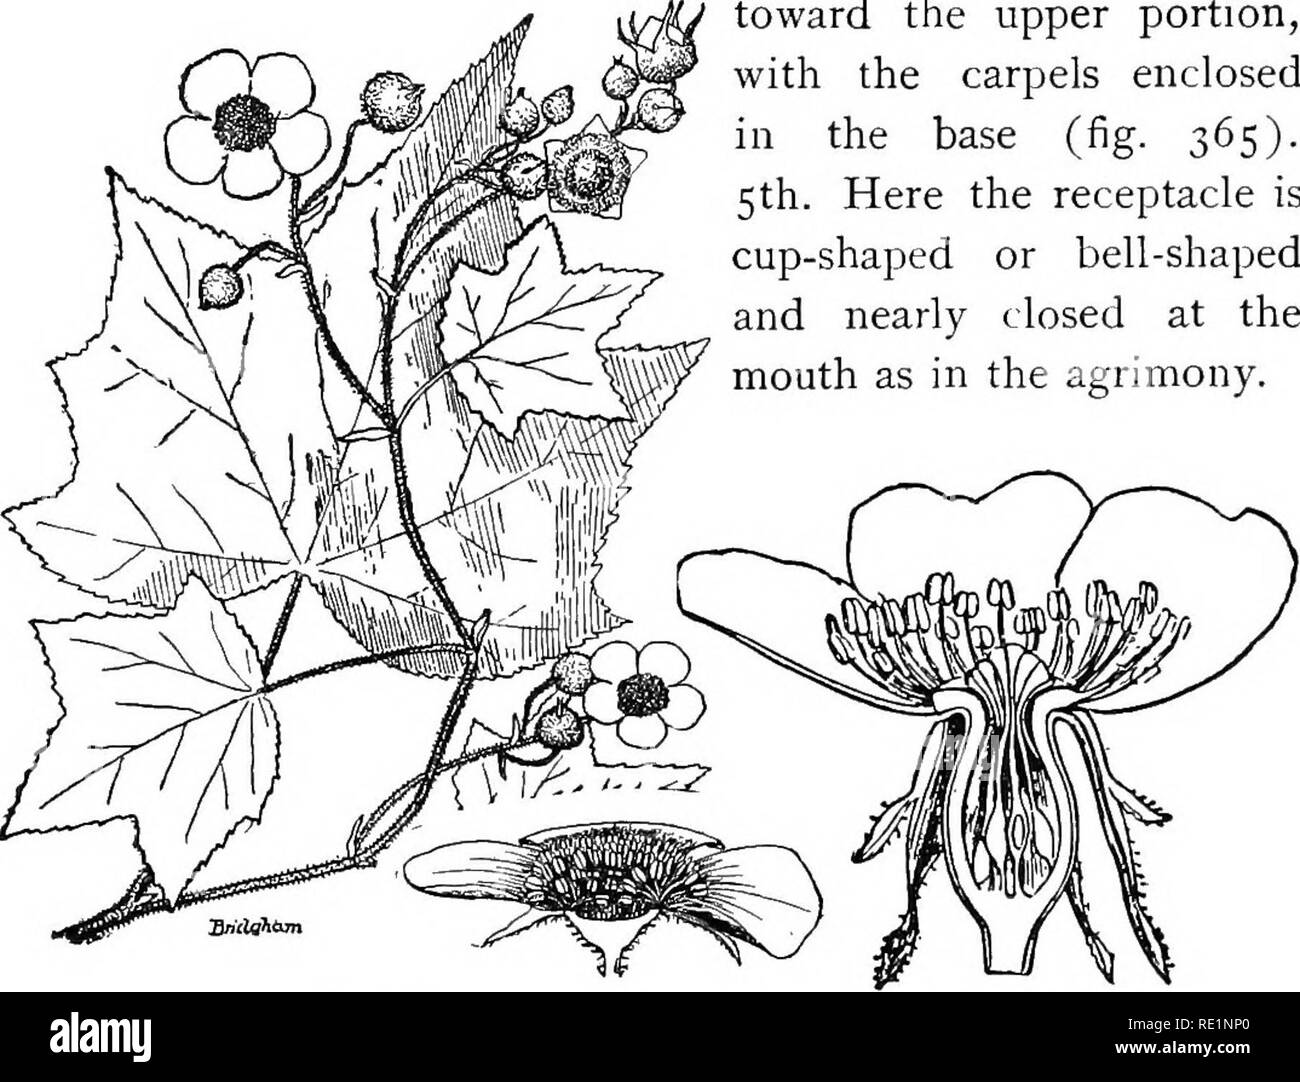 . Elementary botany. Botany. 276 DICO r YLED ONS.. toward the upper portion, with the carpels enclosed in the base (fig. 365). 5th. Here the receptacle is cup-shaped or bell-shaped and nearly closed at the mouth as in the agrimony. Fig, 364. Fig. 365, Flowering raspberry (Rubus odoratus). Perigynous flower of rosa, with contracted receptacle. (From Warming.) 532. Lesson XII. The almond or plum family (amygdala- ceae).—The members of this family are trees or shrubs. The common choke-cherry (fig. 366) will serve to represent one of the types. The flowers of this species are borne in racemes. The Stock Photo